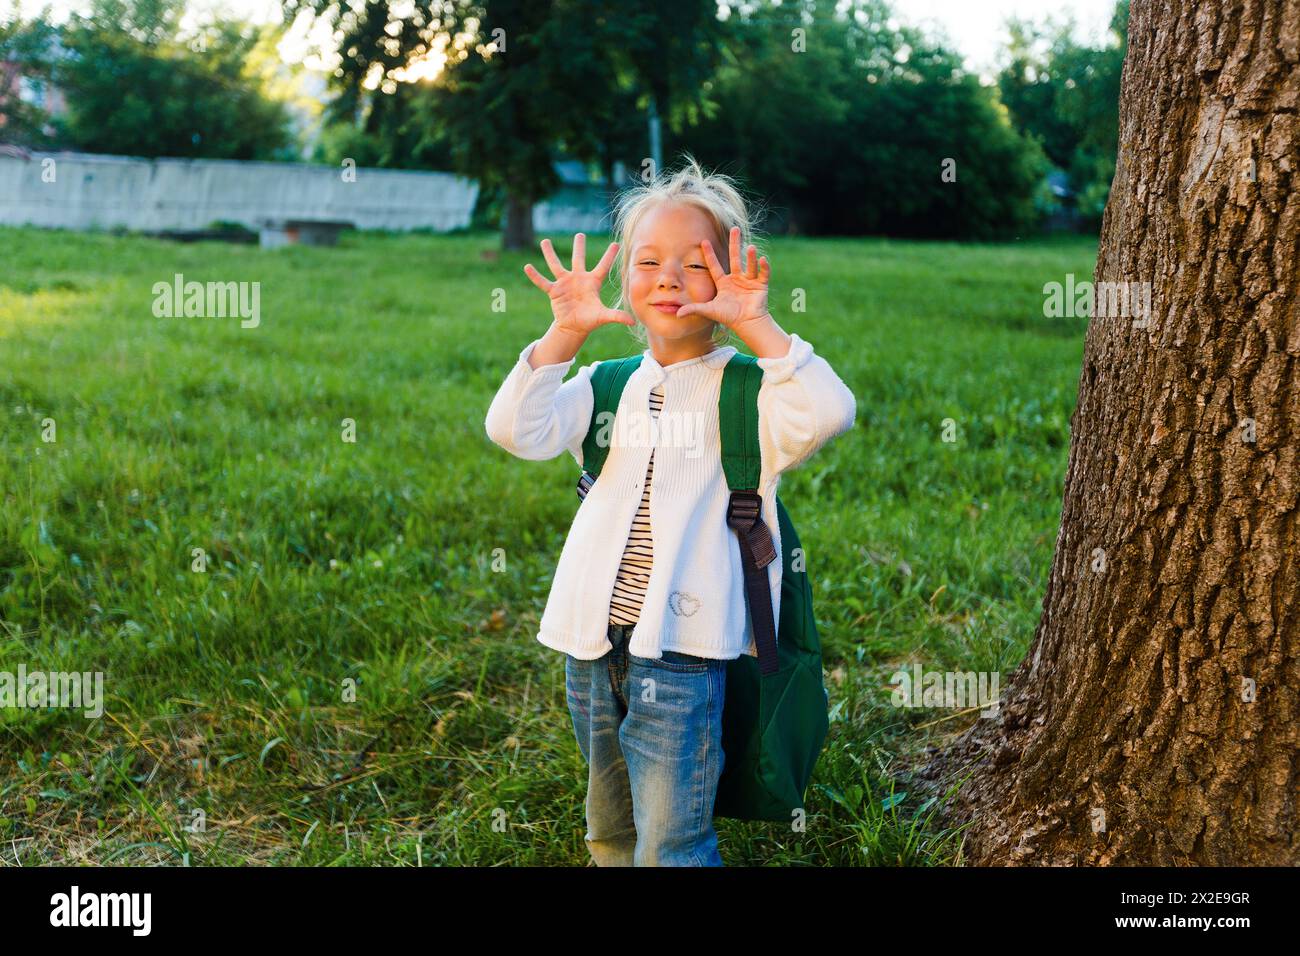 A little girl makes faces and has fun in a beautiful summer park. Stock Photo